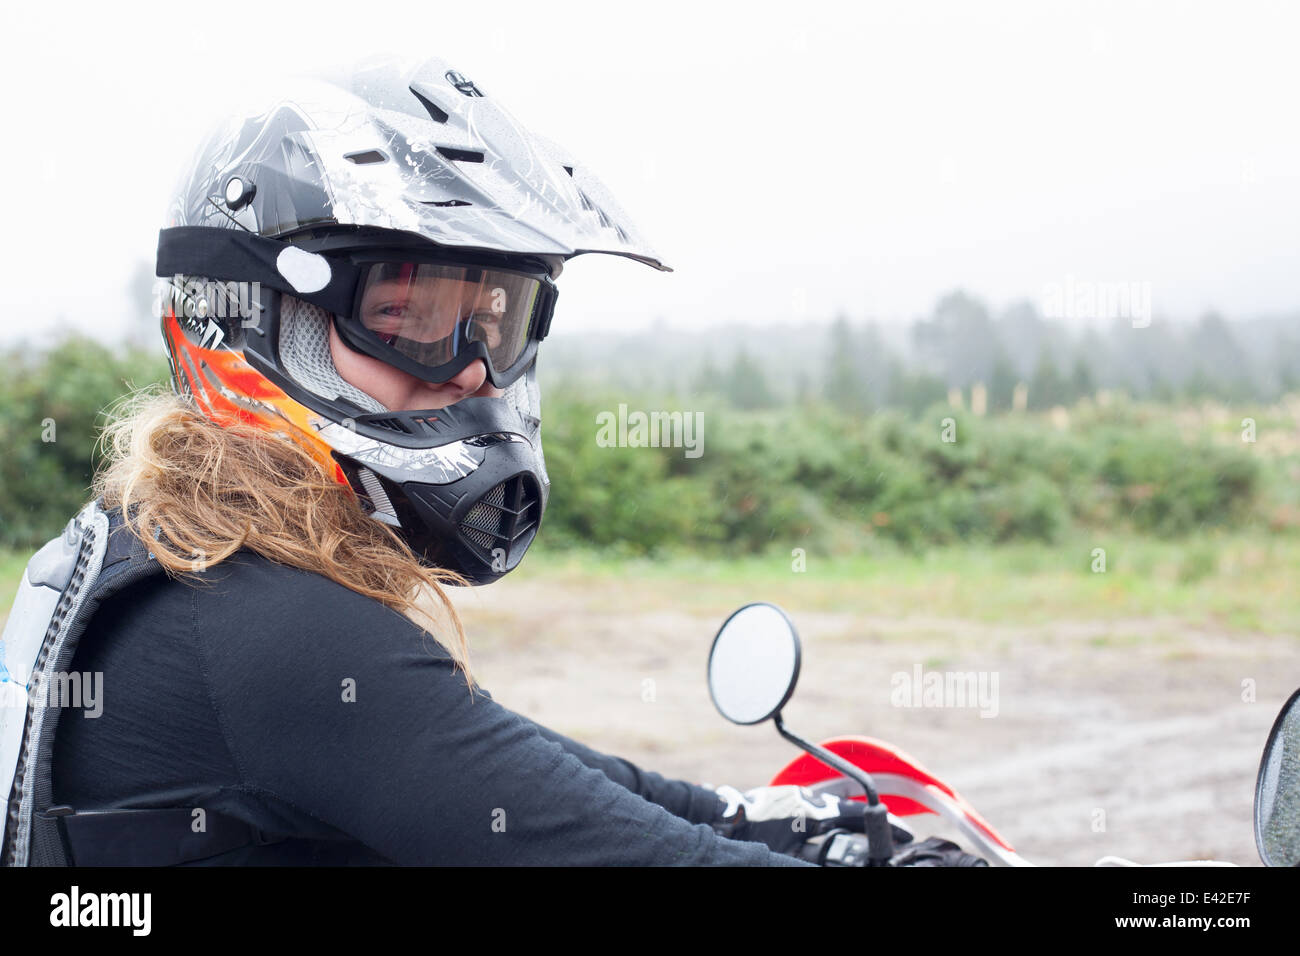 Portrait of mid adult female motorcyclist in crash helmet and goggles Stock Photo